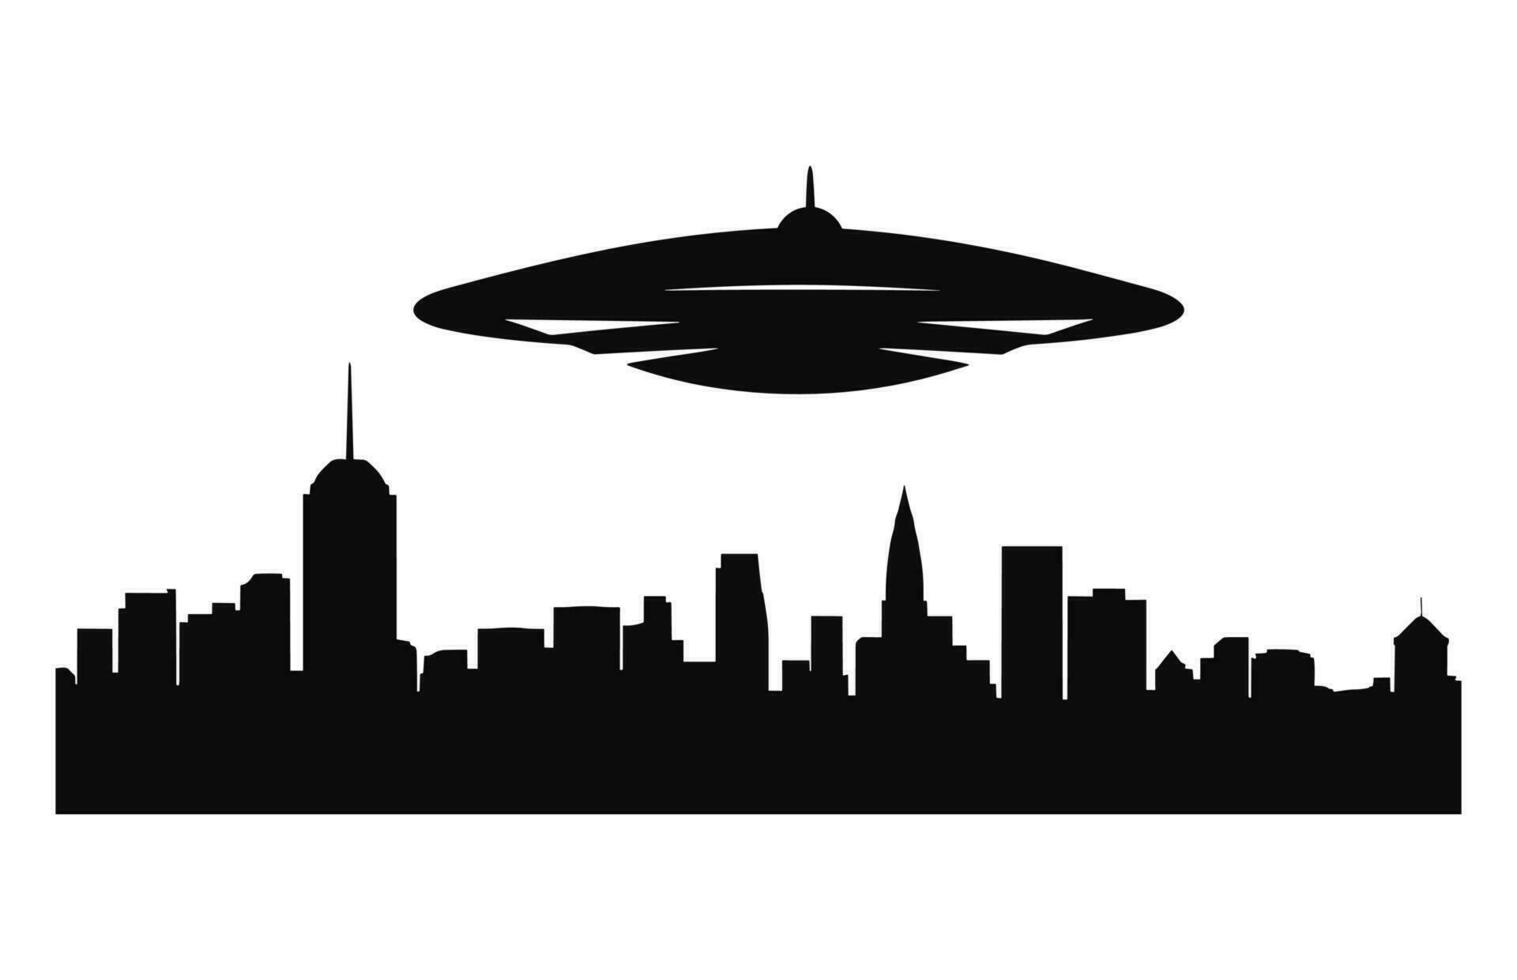 A UFO in City black Silhouette vector, Flying saucer City abduction Silhouette vector